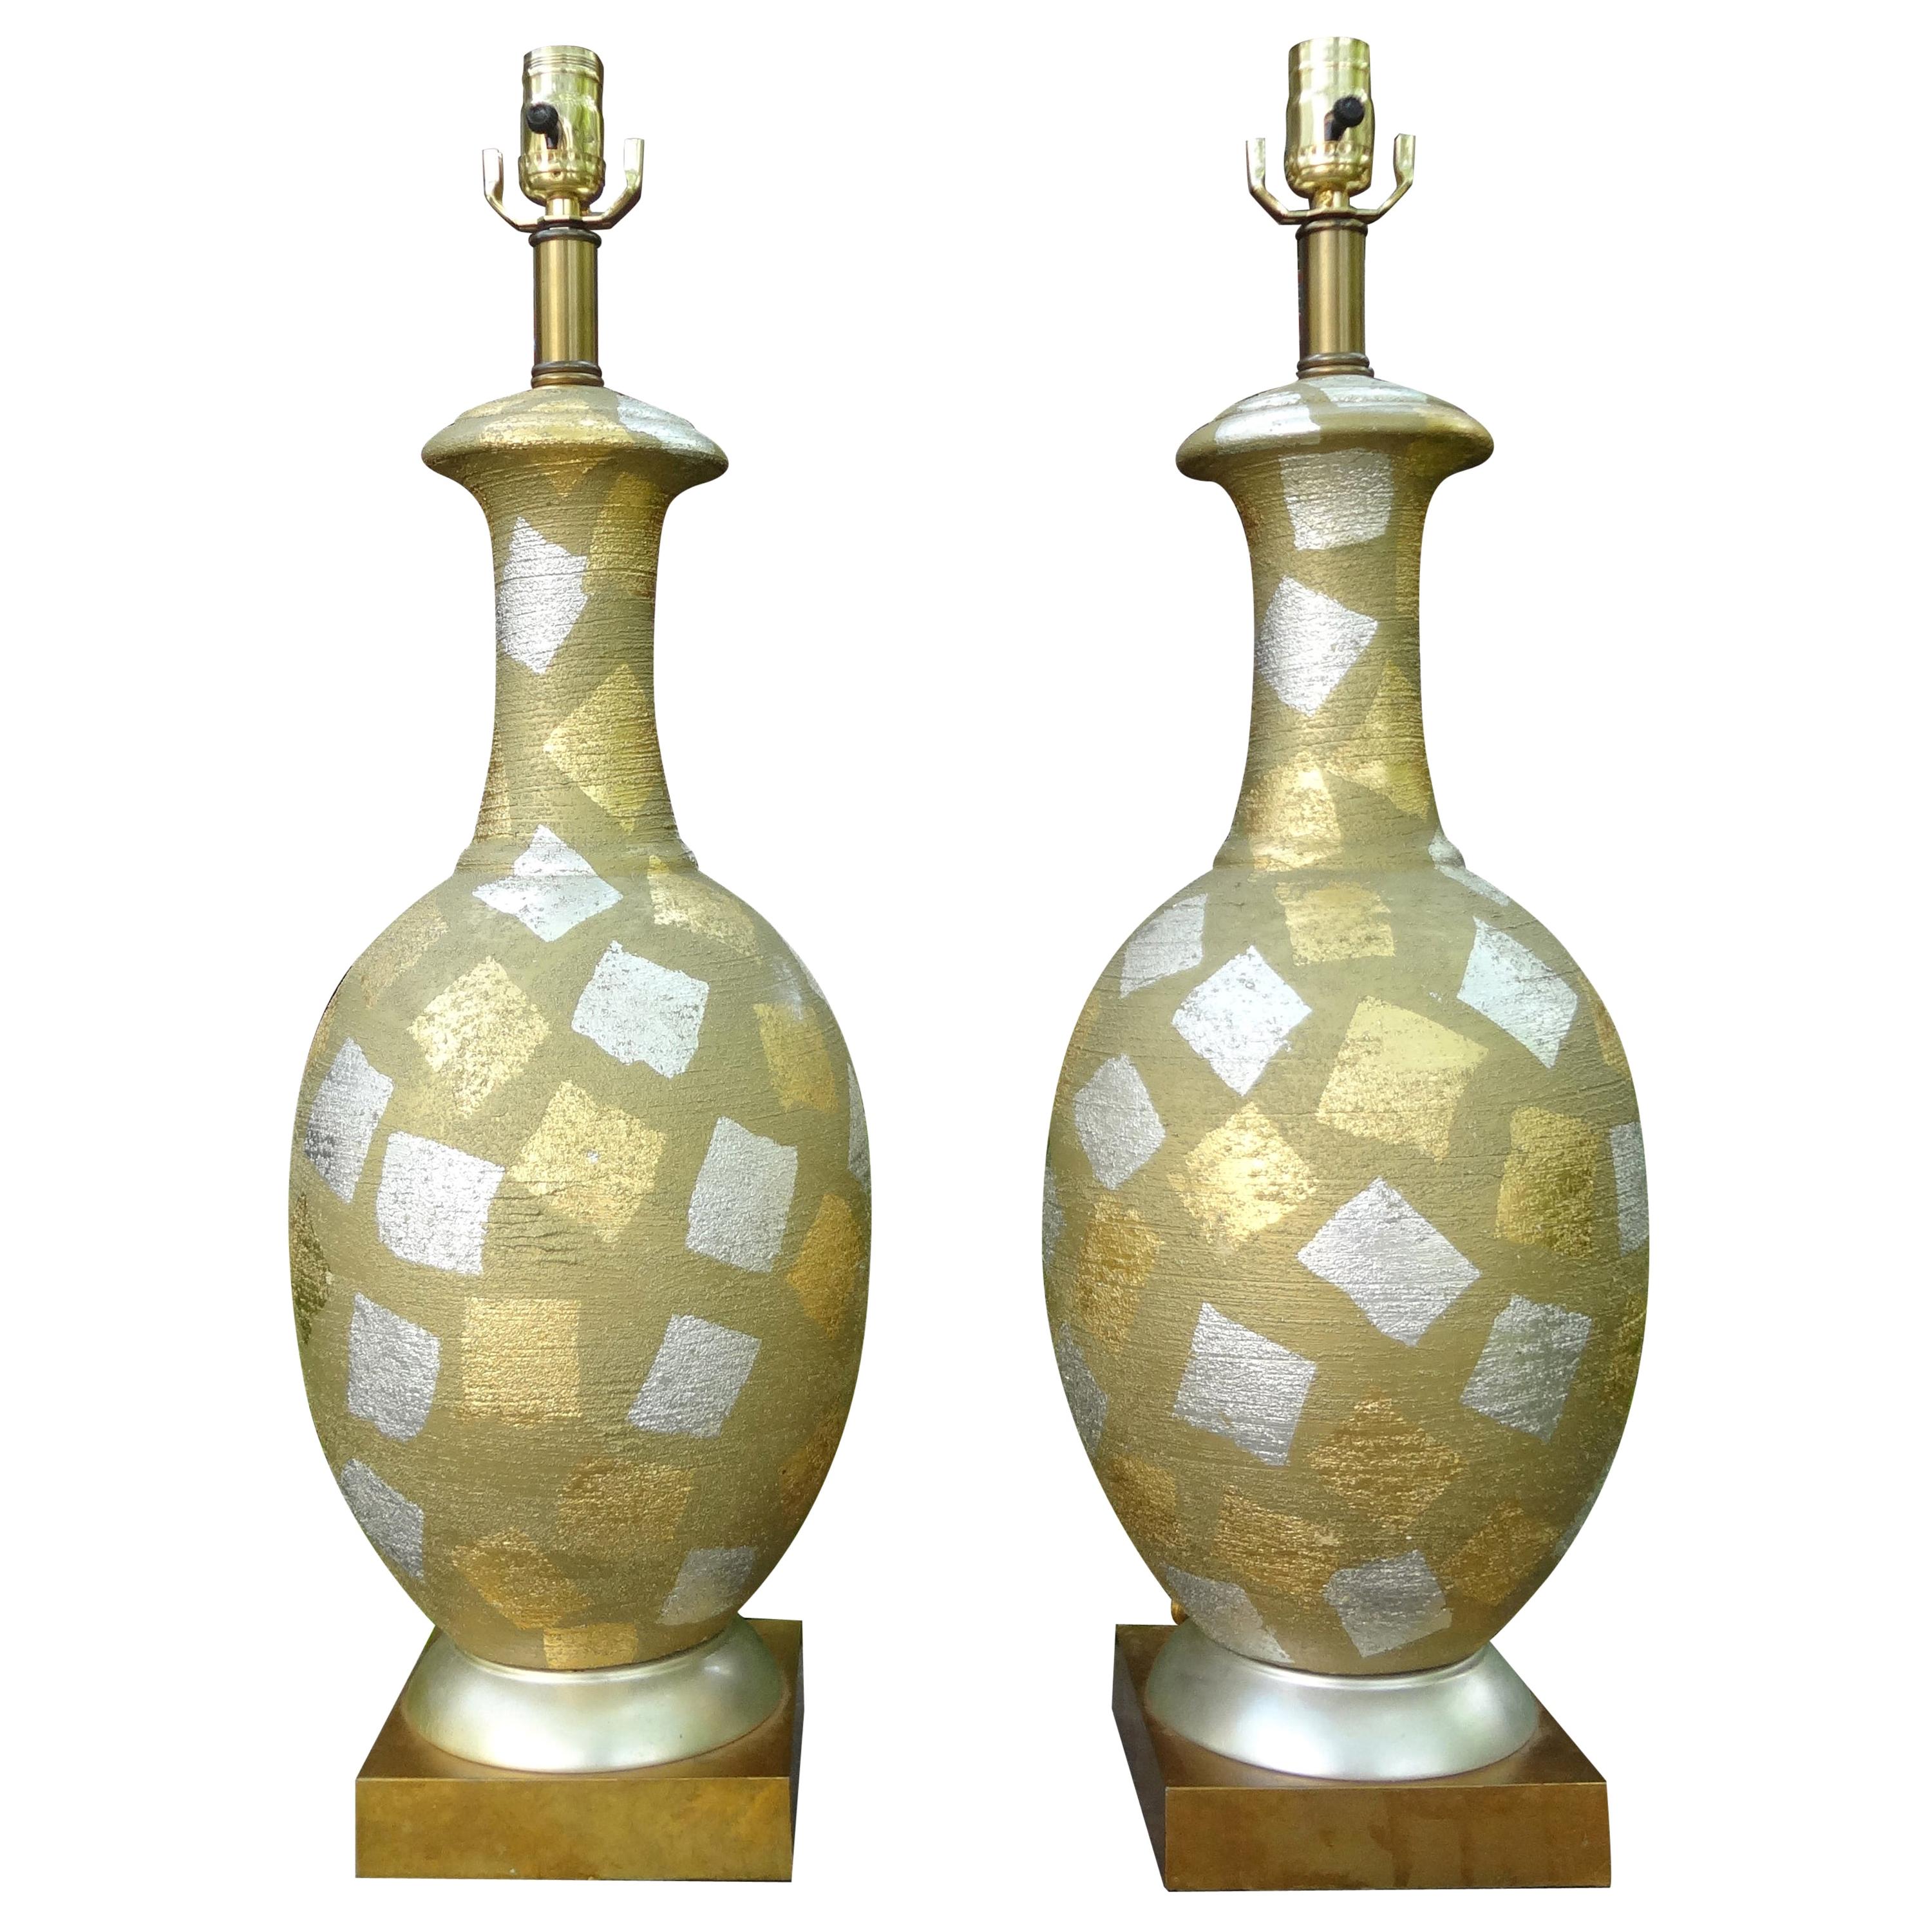 Pair of Hollywood Regency gold and silver gilt harlequin lamps.
Striking pair of Hollywood Regency gold and silver gilt harlequin lamps. This great pair of midcentury lamps, possibly Italian have been newly wired to U.S. specifications with new